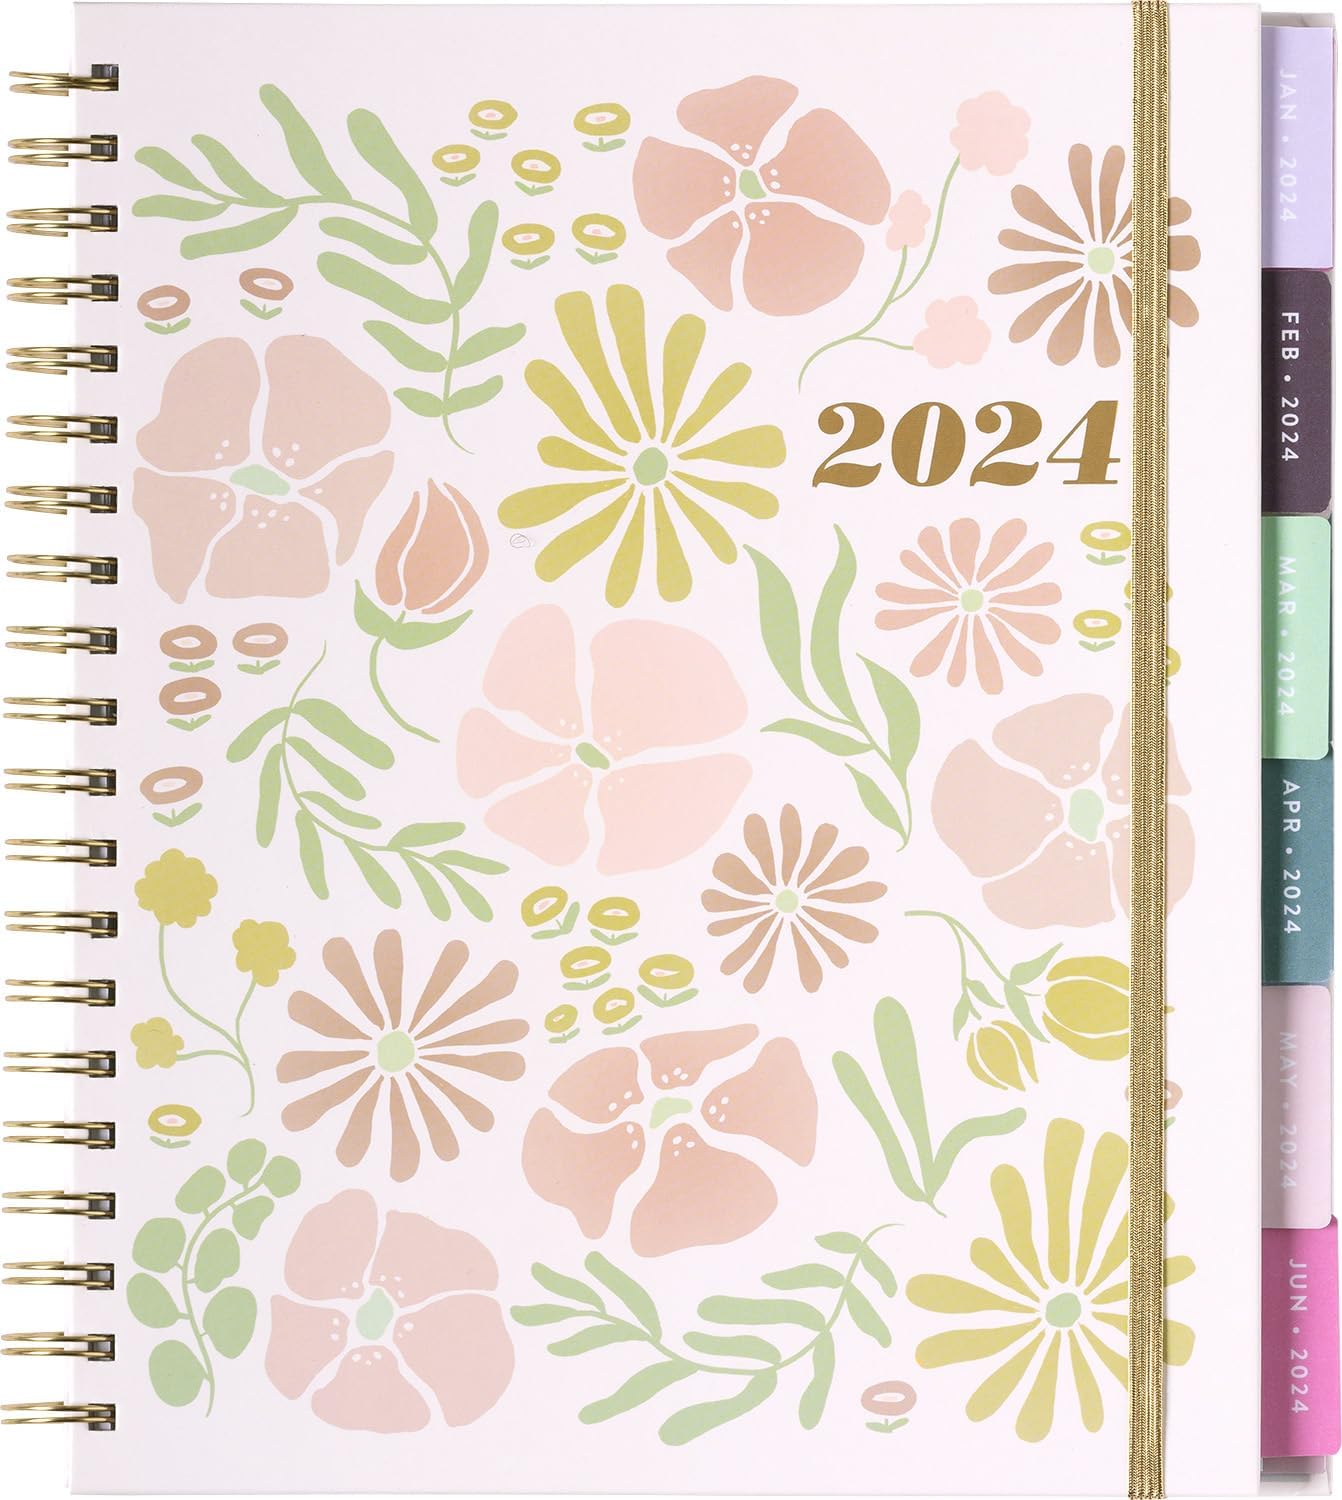 2024 Coral Pink Flowers Large Spiral Planner